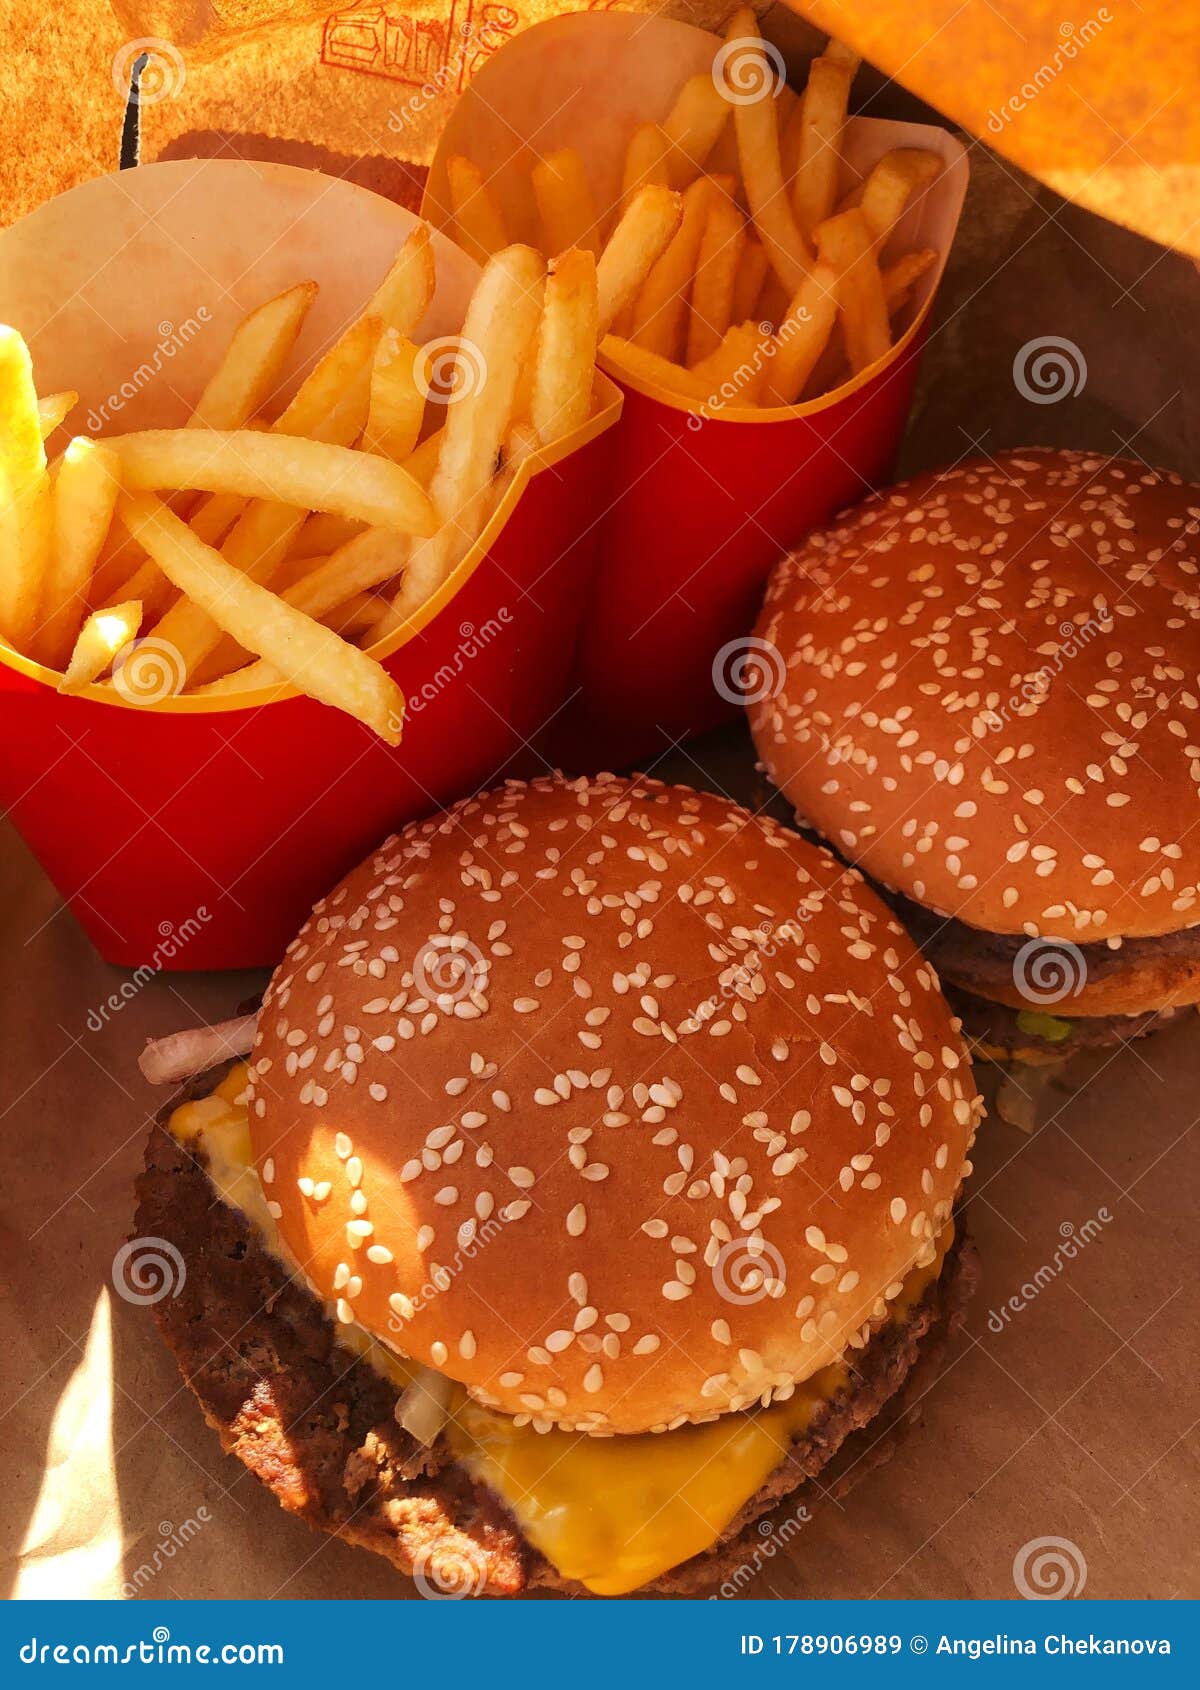 Beef Burgers And French Fries In The Cafe Stock Image Image Of Food